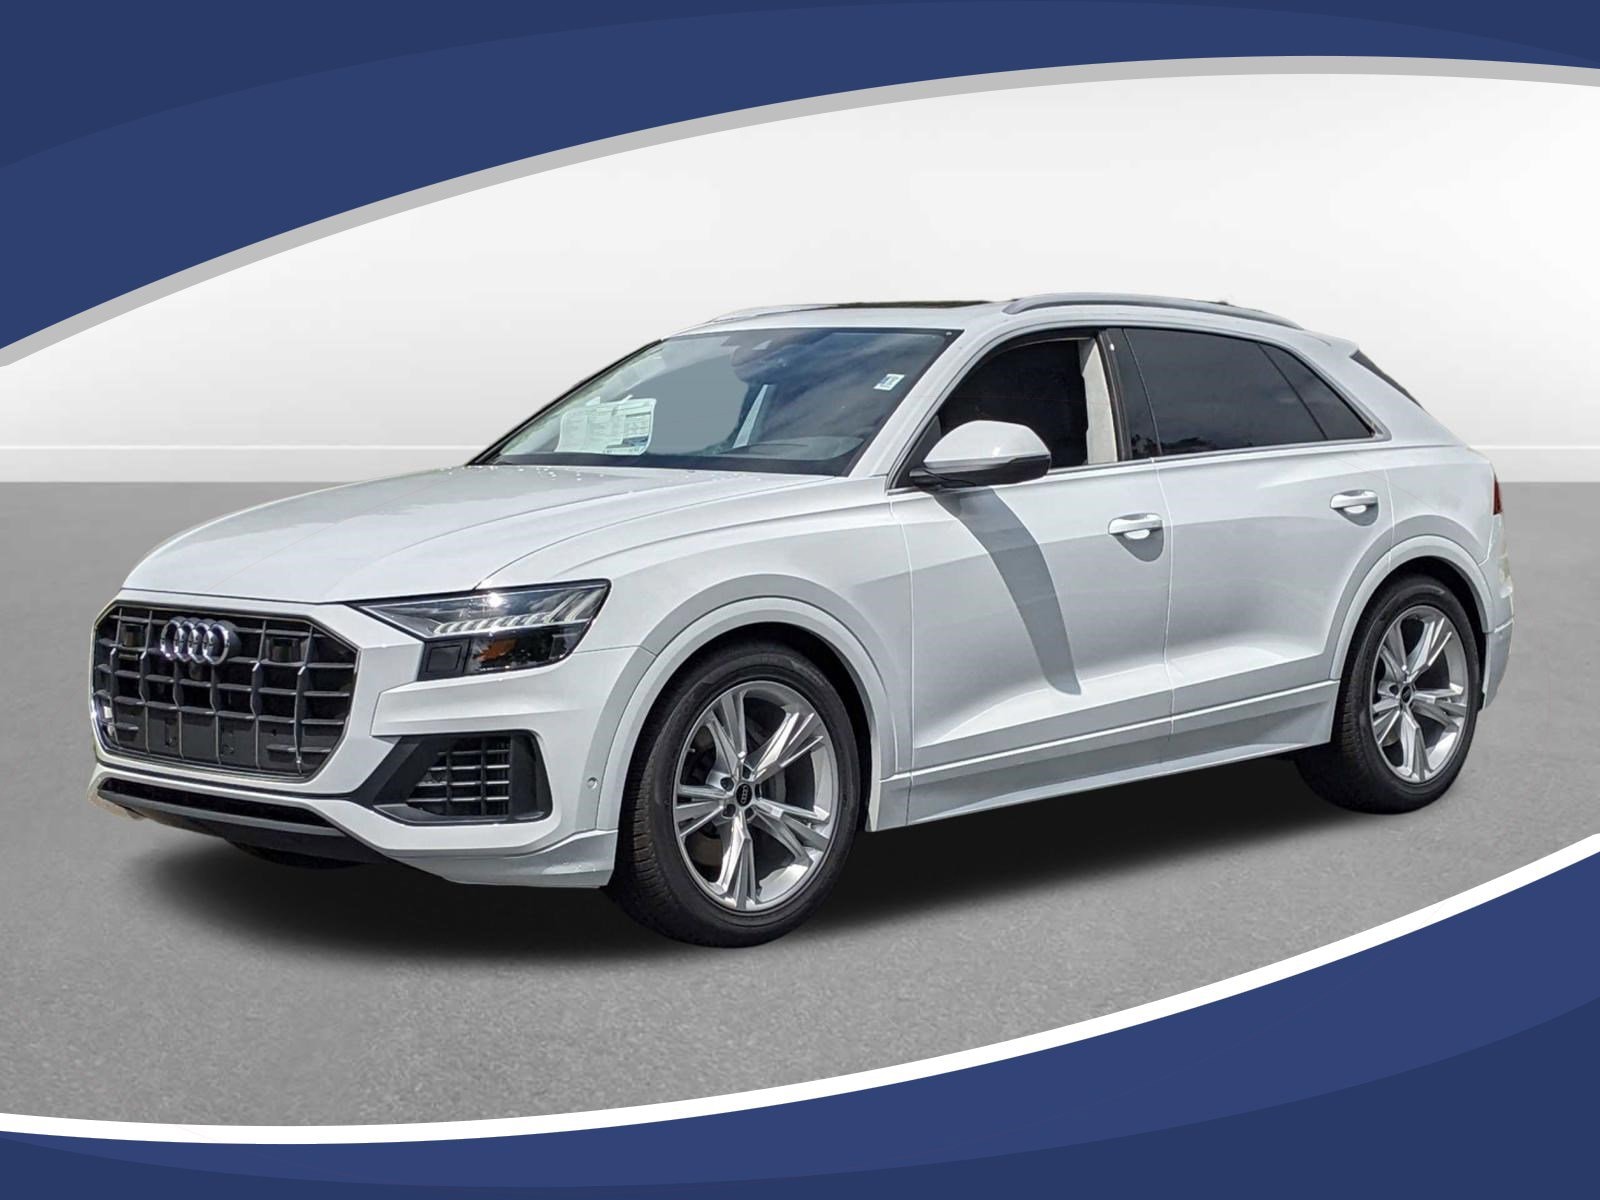 New 2023 Audi Q8 For Sale in Cary NC near Raleigh and Durham